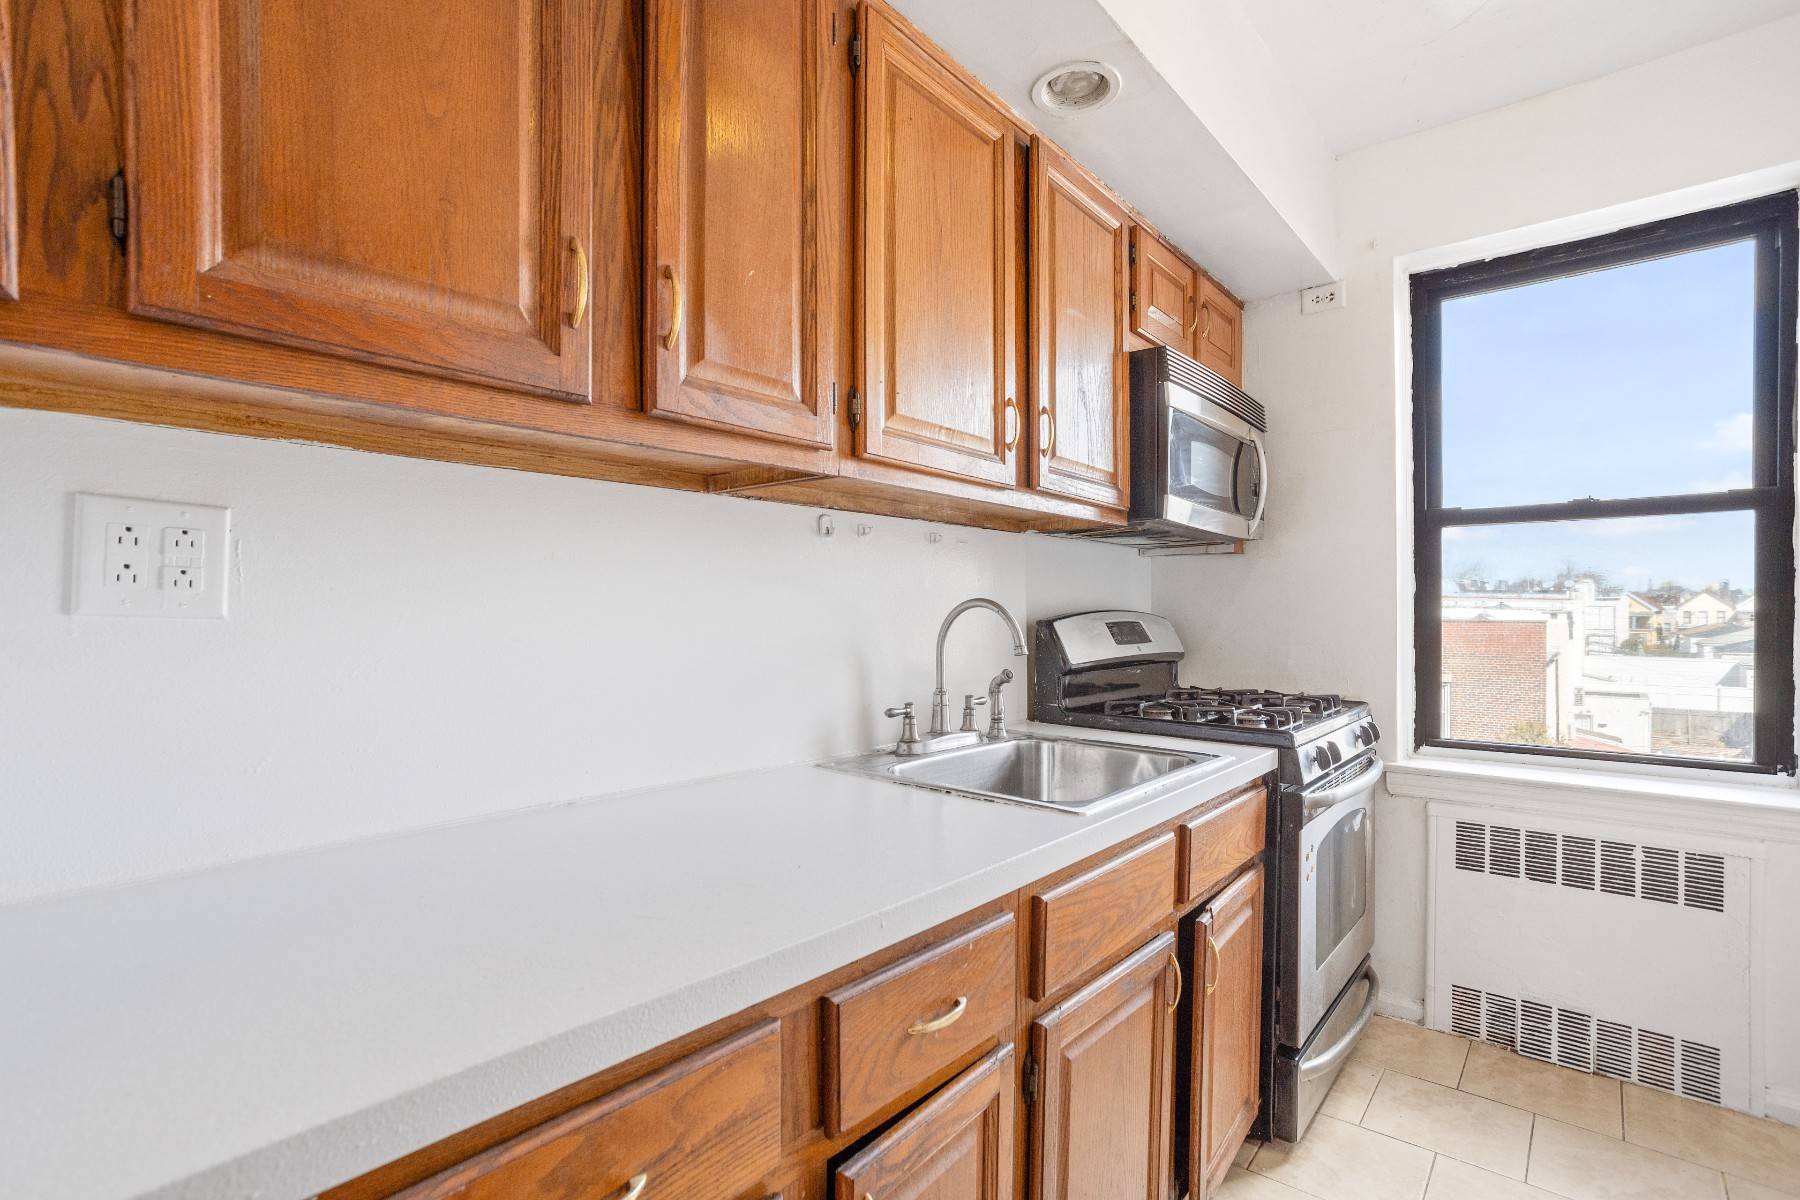 Welcome to Unit C9 at 138 71st Street in the charming neighborhood of Bay Ridge, Brooklyn.